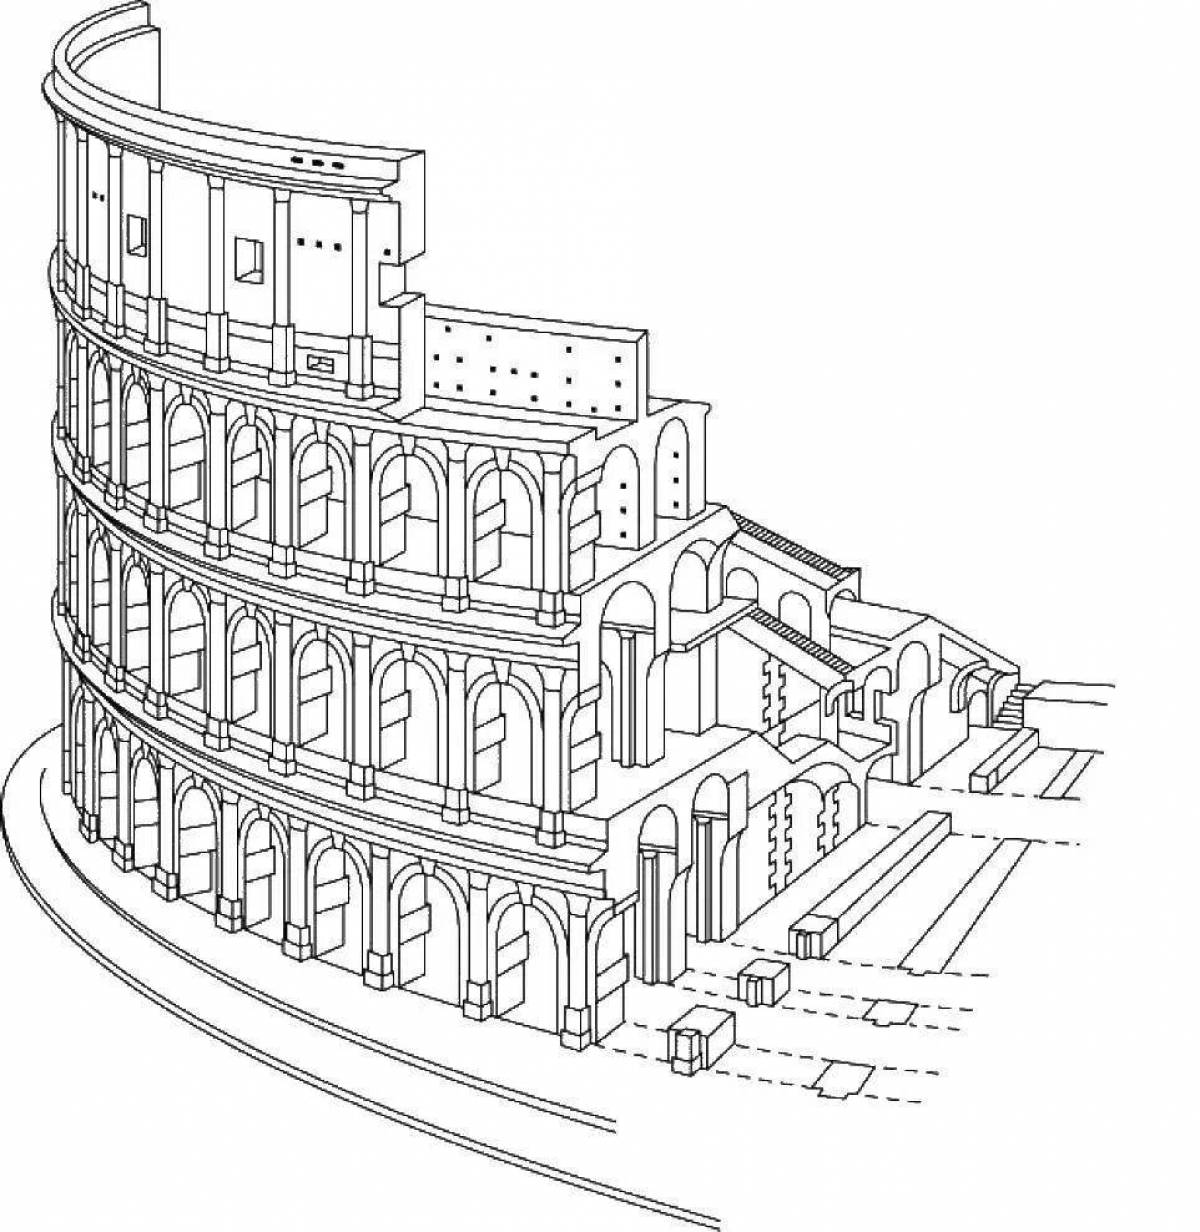 Coloring book monumental colosseum in rome